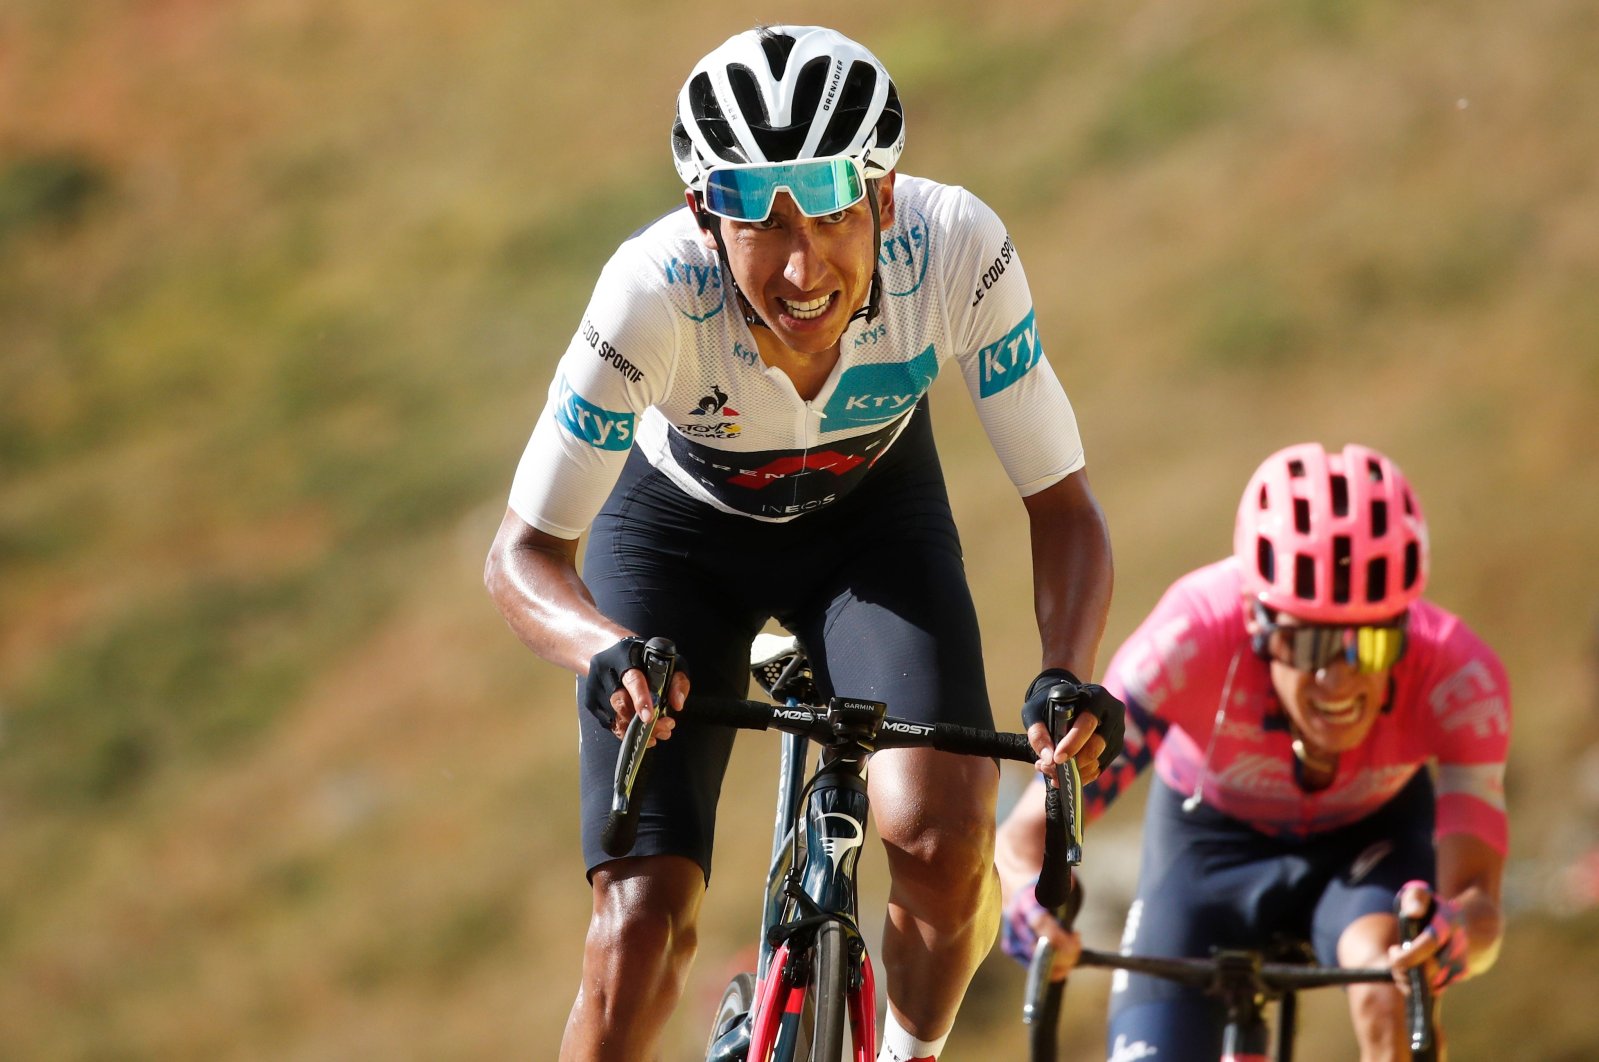 Team Ineos rider Egan Bernal arrives at the finish line of the 13th stage of the Tour de France cycling race, near Puy Mary, France, Sept. 11, 2020. (AFP Photo)